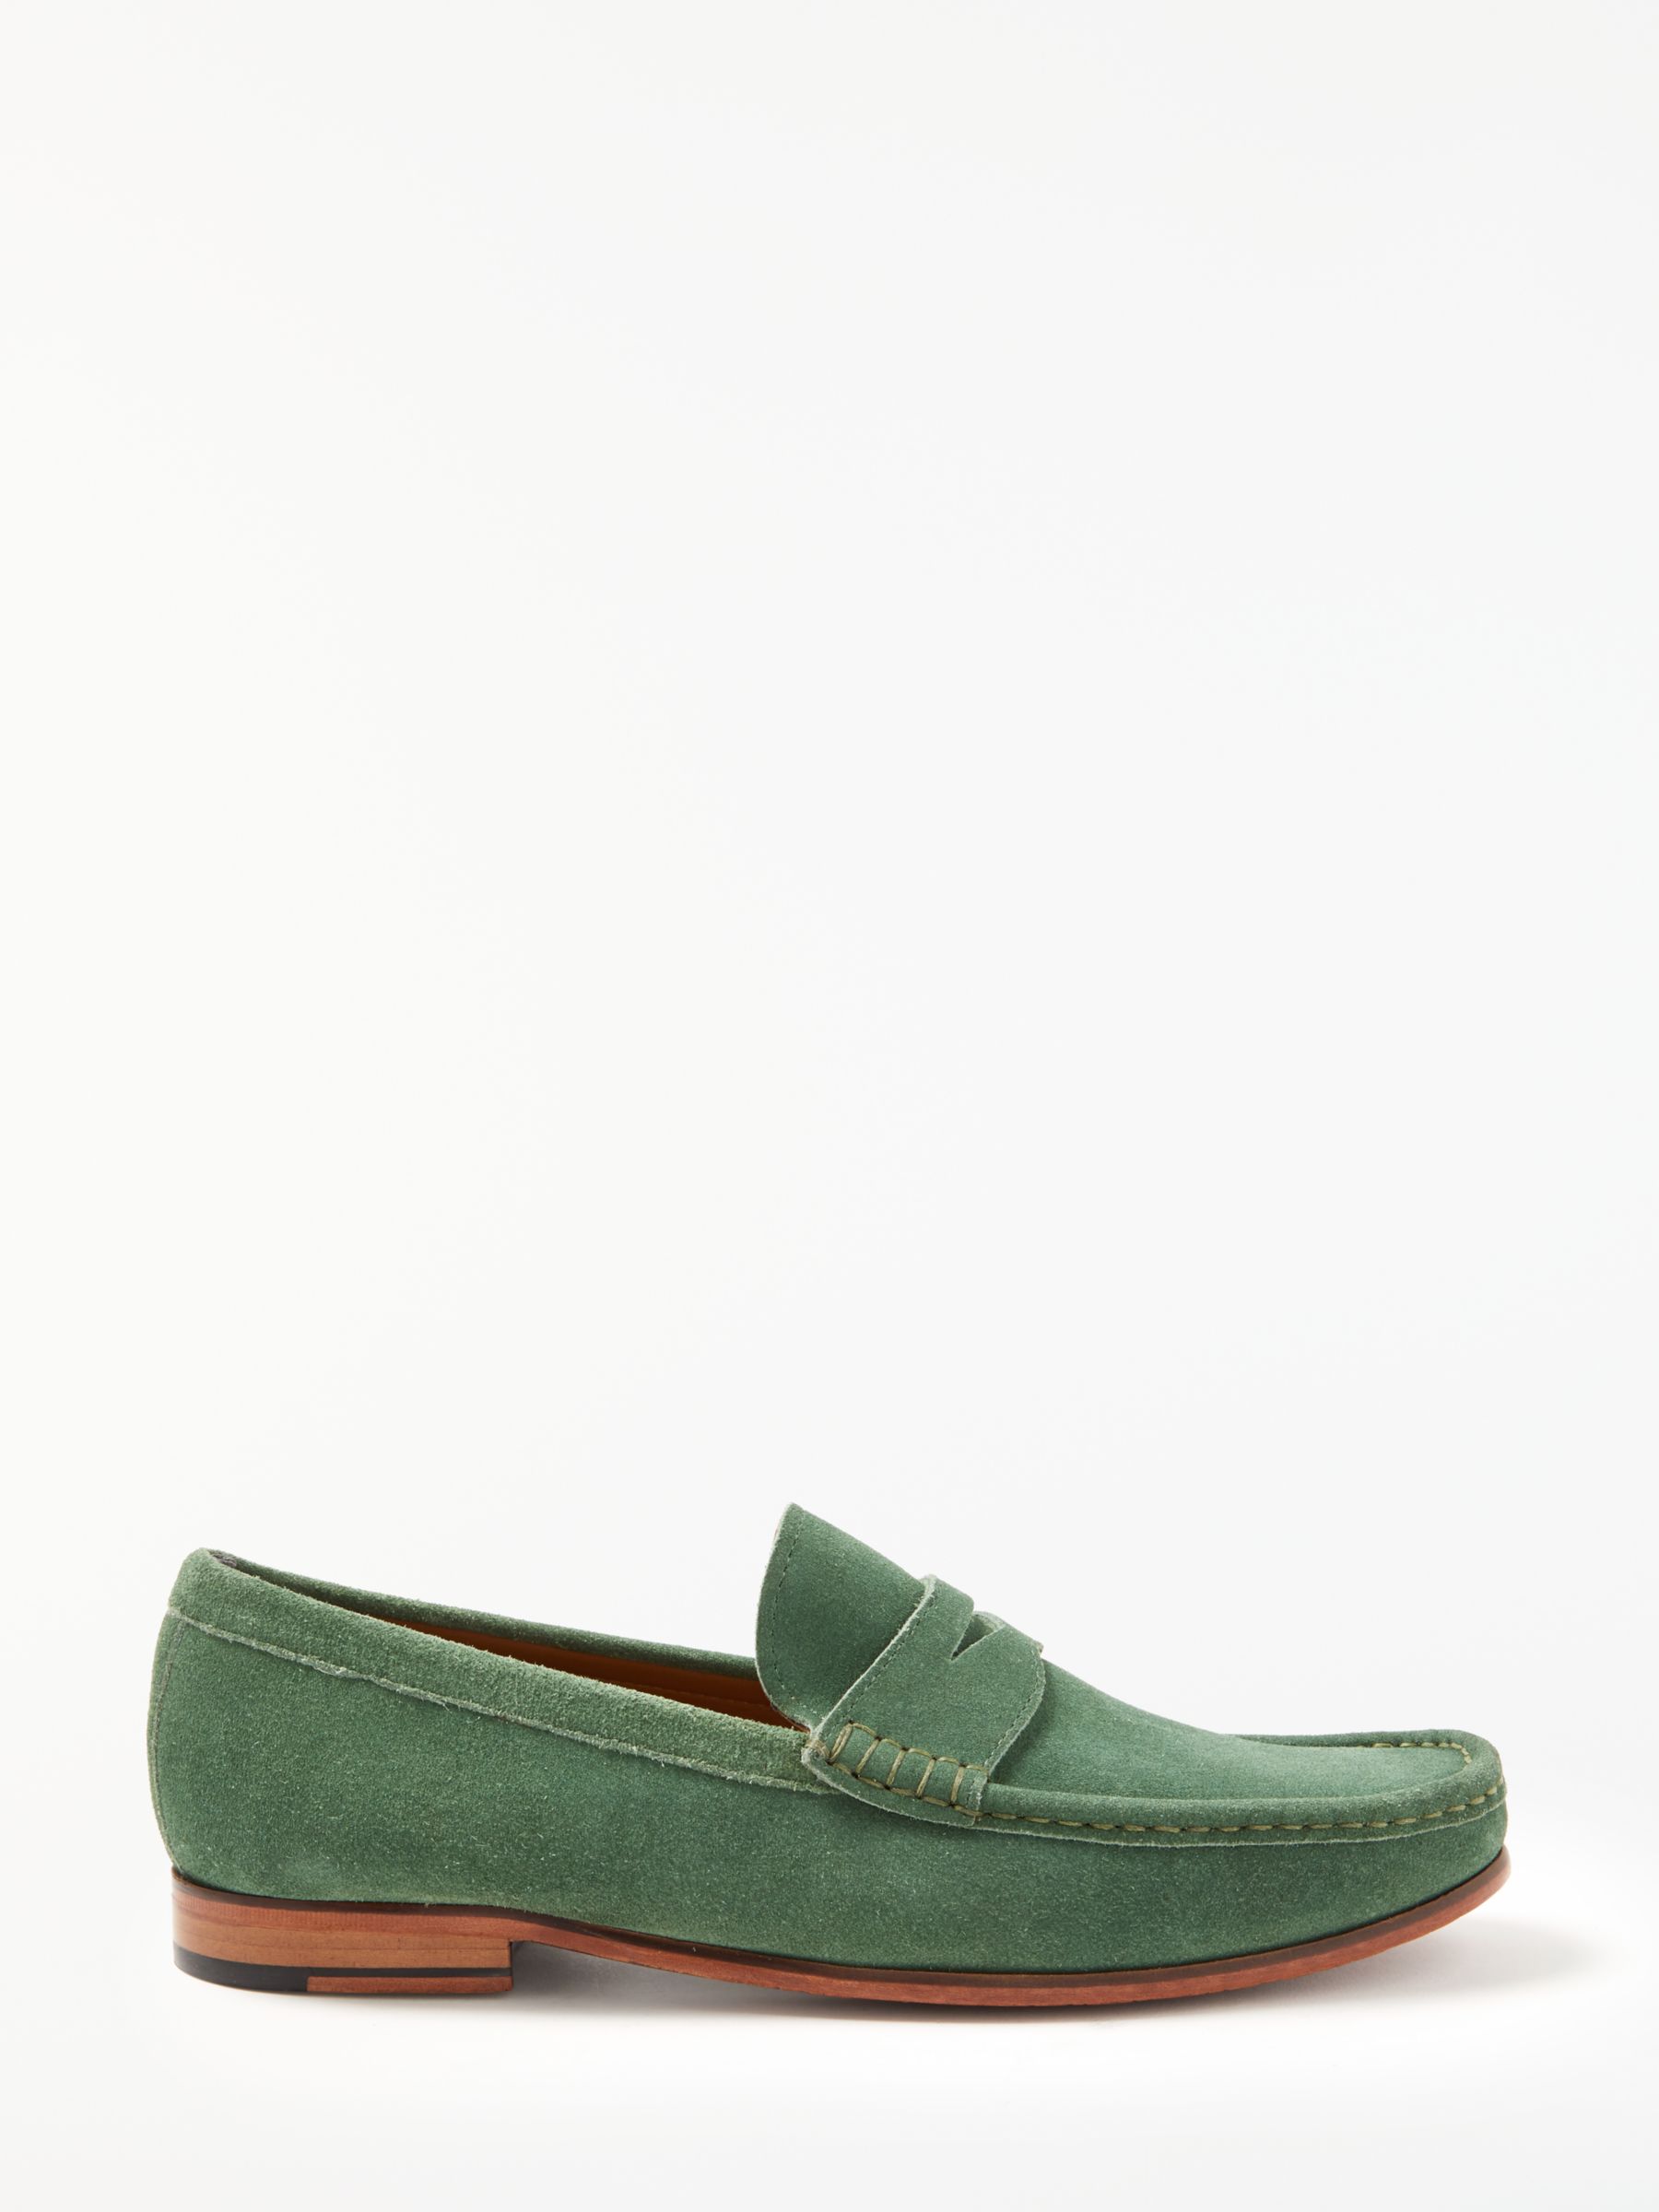 John Lewis & Partners Louis Suede Penny Loafers, Green, 11